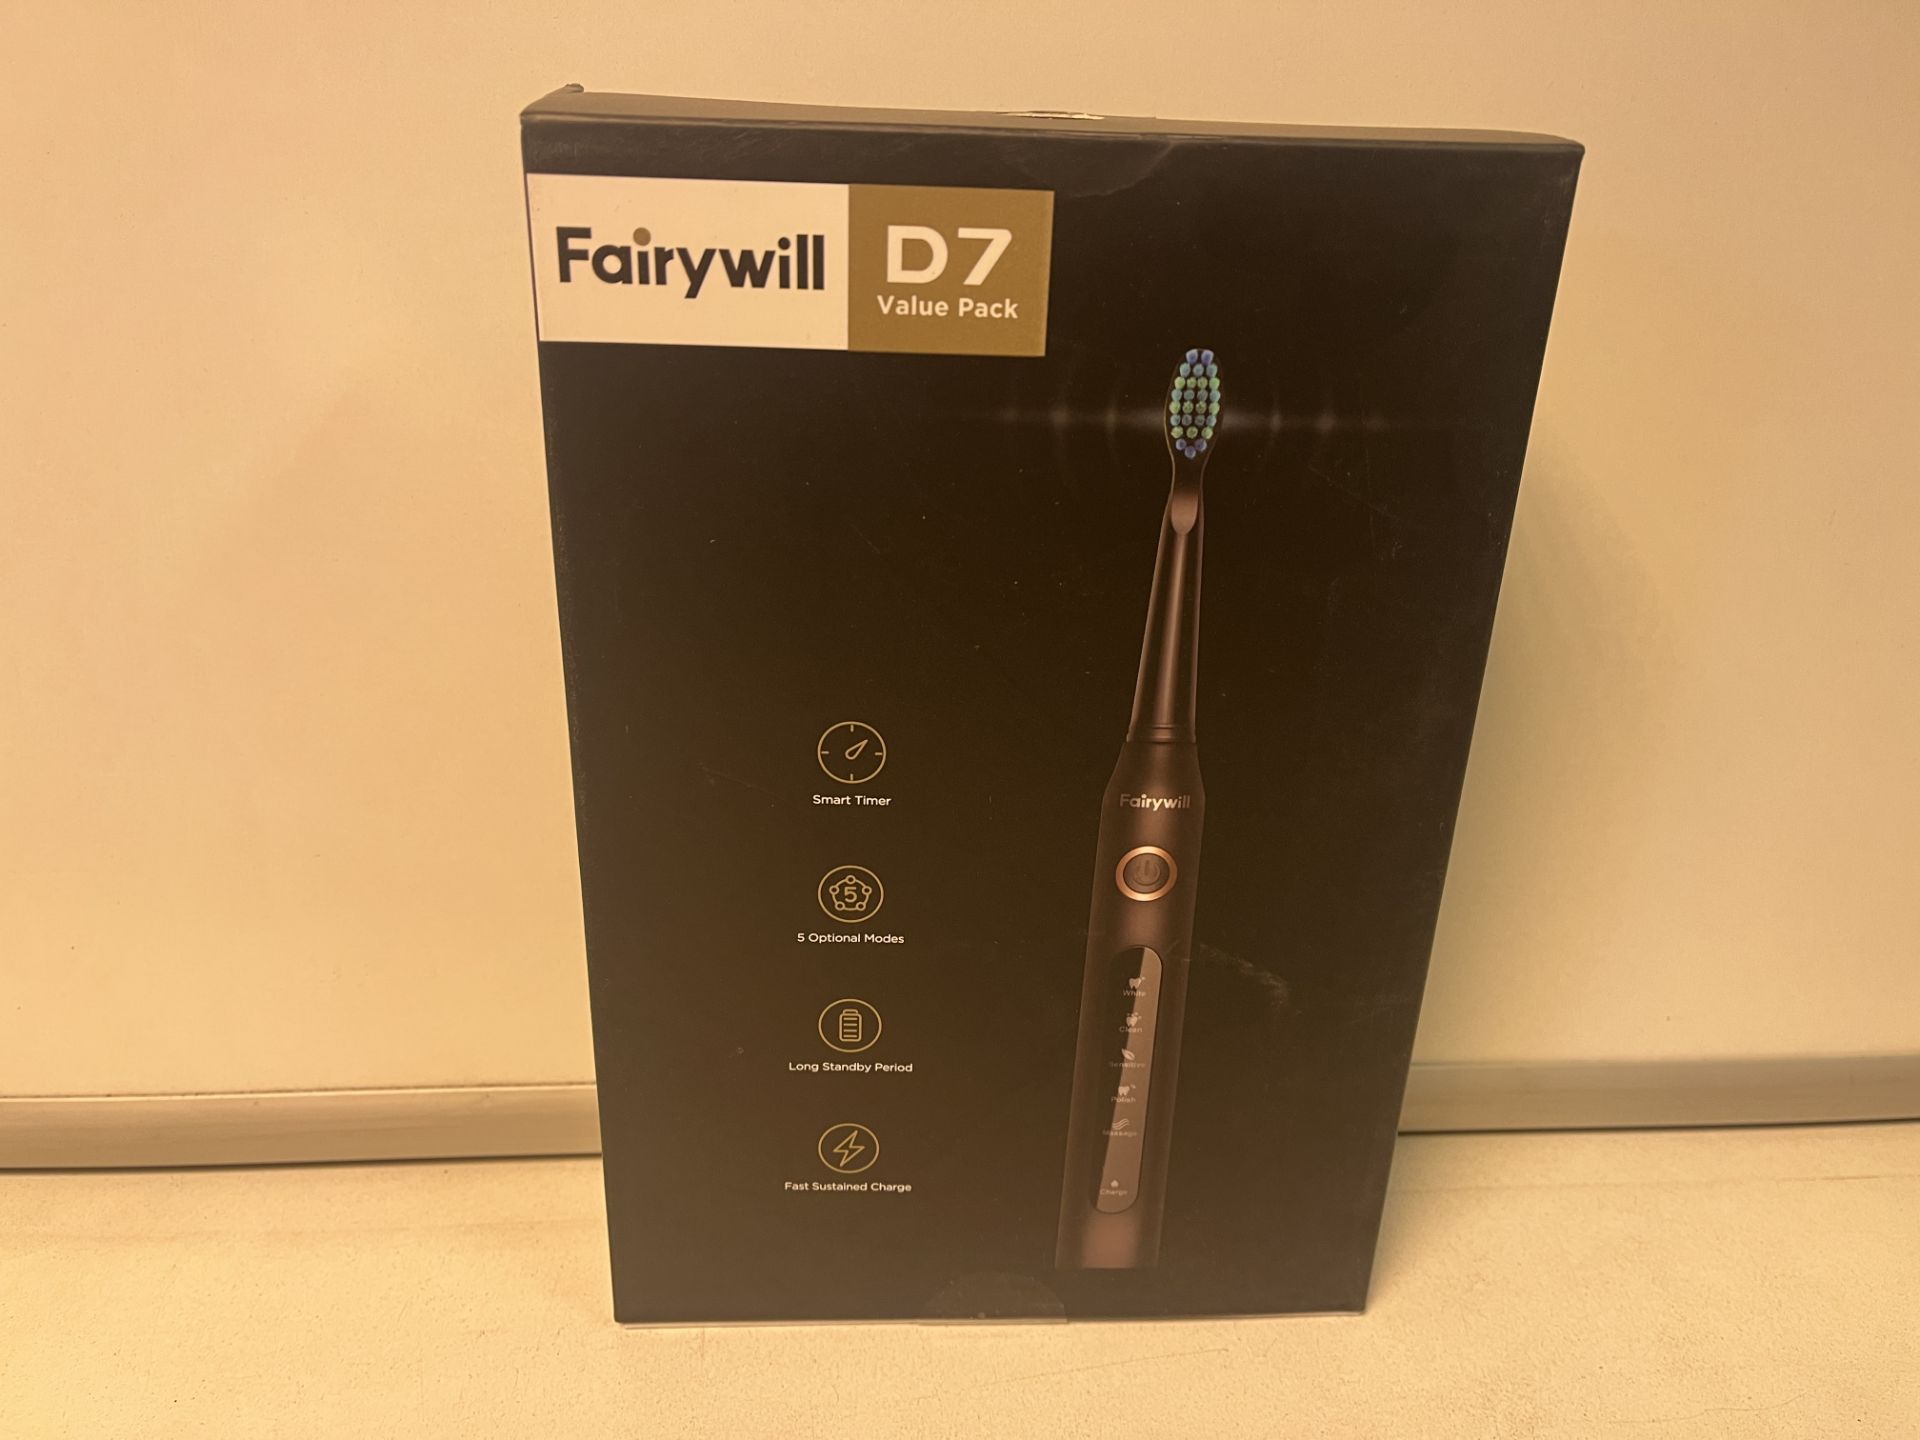 2 X BRAND NEW BOXED FAIRYWELL D7 VALUEPACK SONIC ELECTRIC TOOTHBRUSH SET. SMART TIMER, 5 OPTIONAL